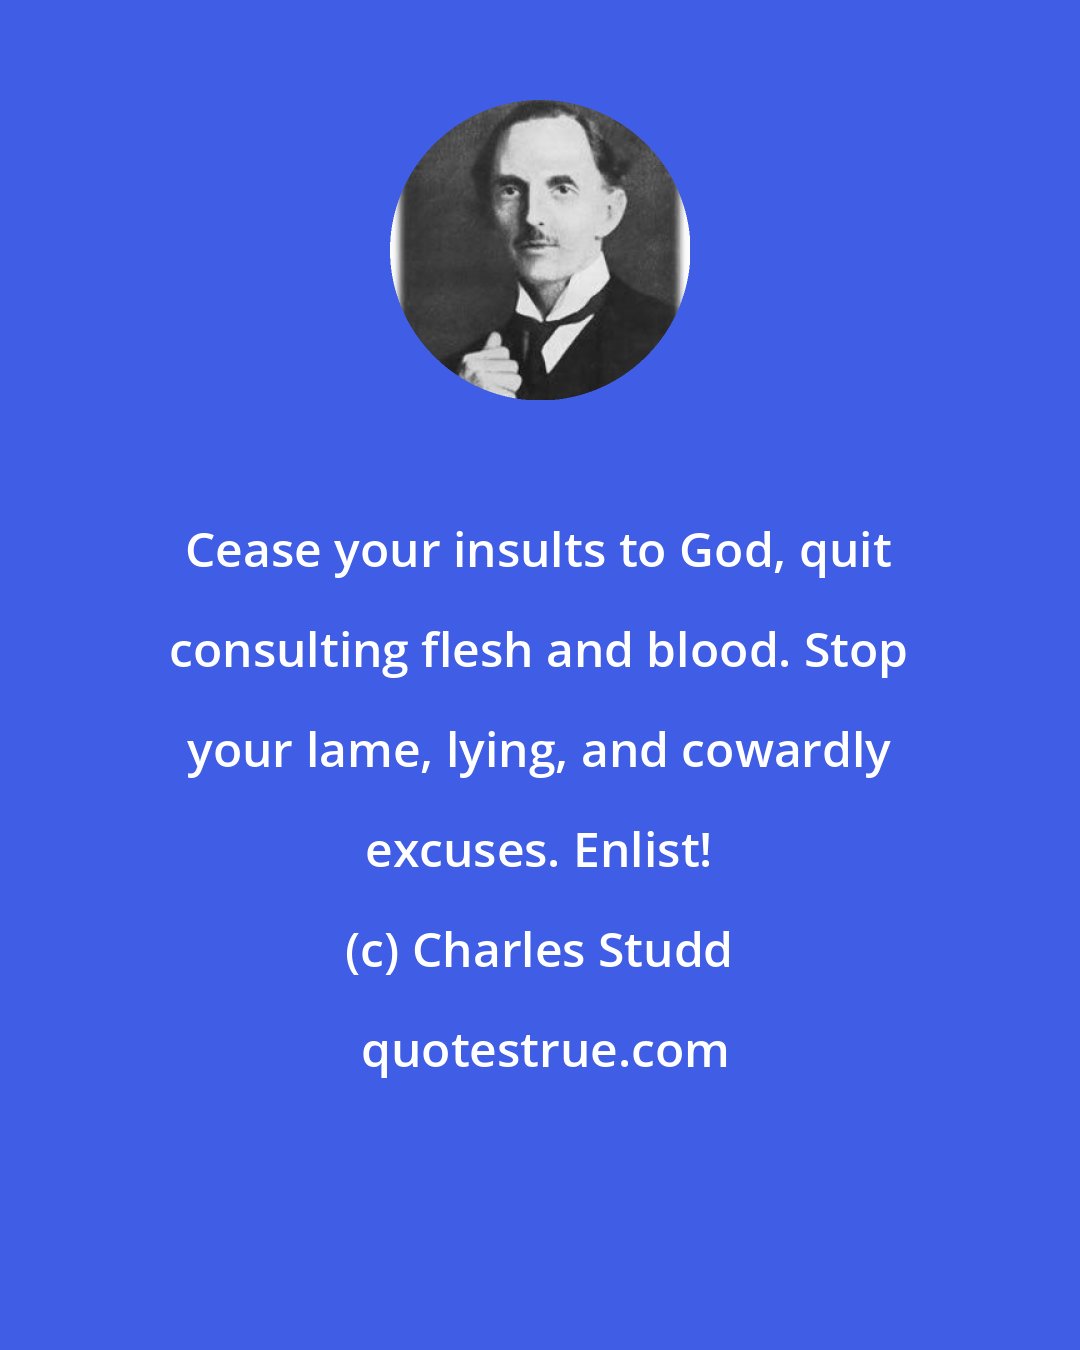 Charles Studd: Cease your insults to God, quit consulting flesh and blood. Stop your lame, lying, and cowardly excuses. Enlist!